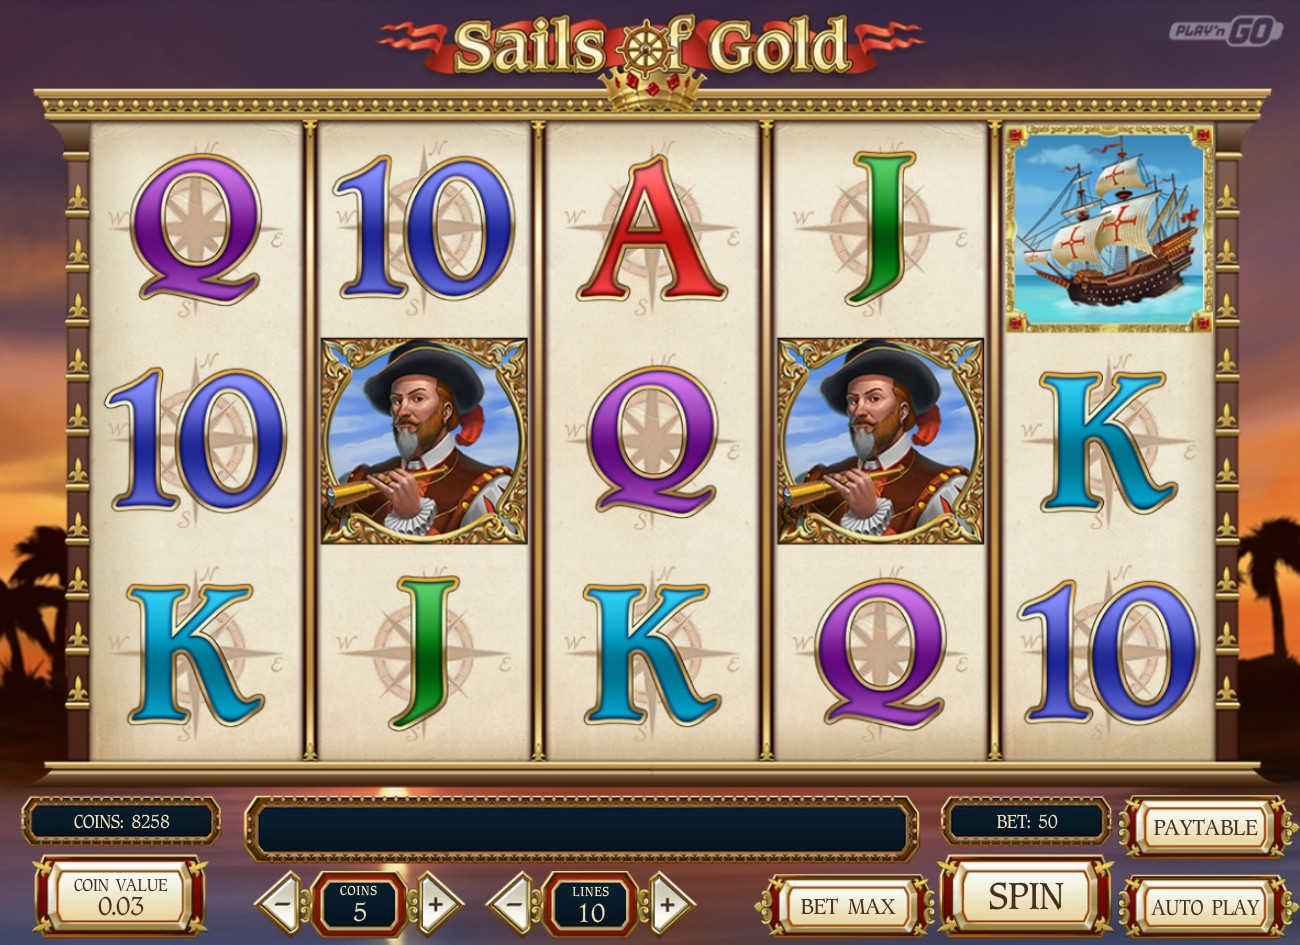 Sails of Gold (Sails of Gold) from category Slots